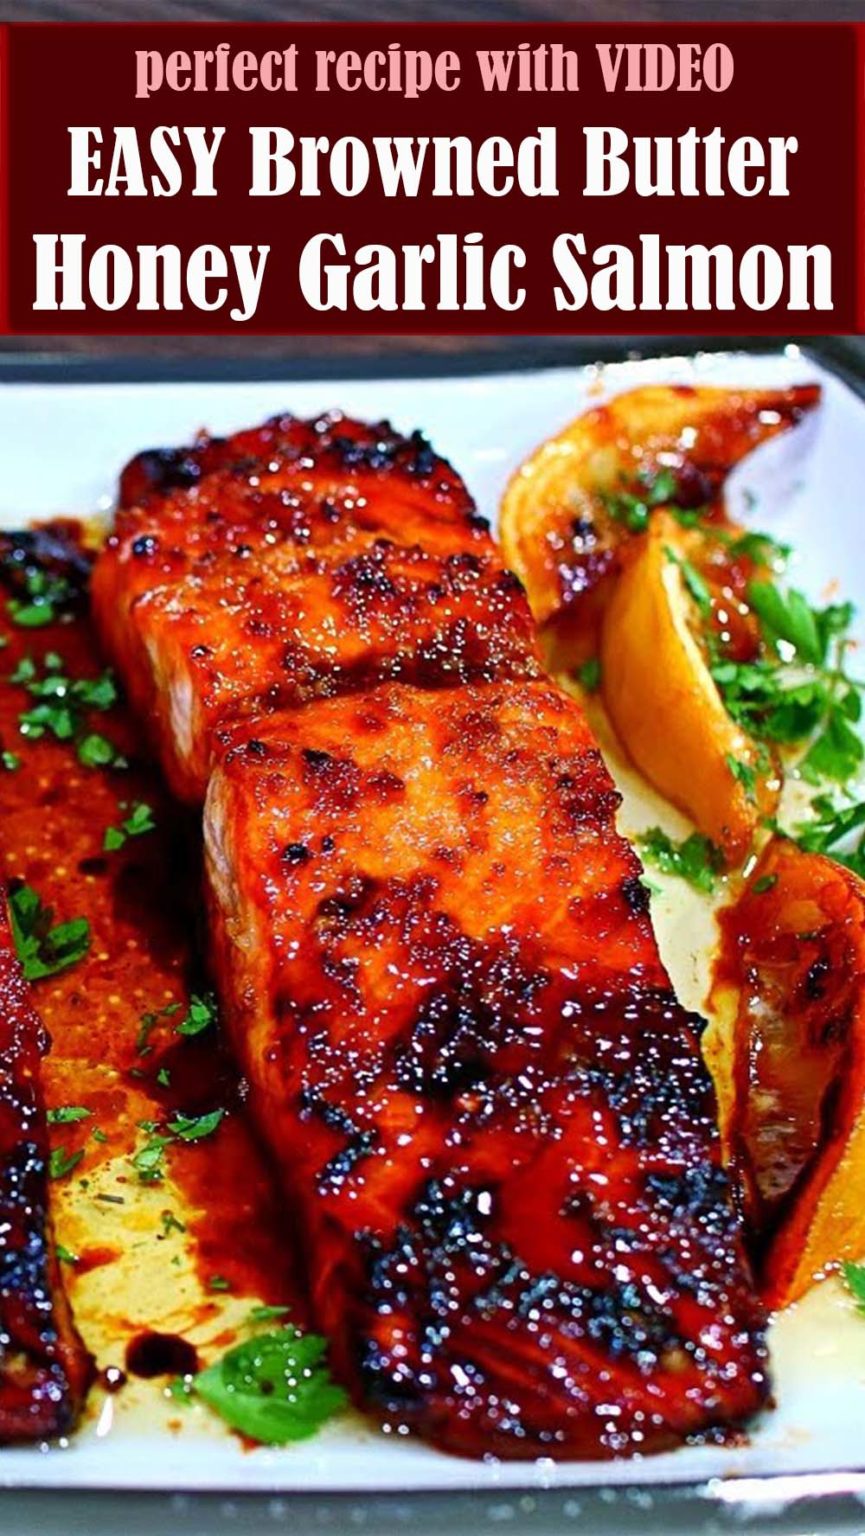 EASY Browned Butter Honey Garlic Salmon with VIDEO – Reserveamana